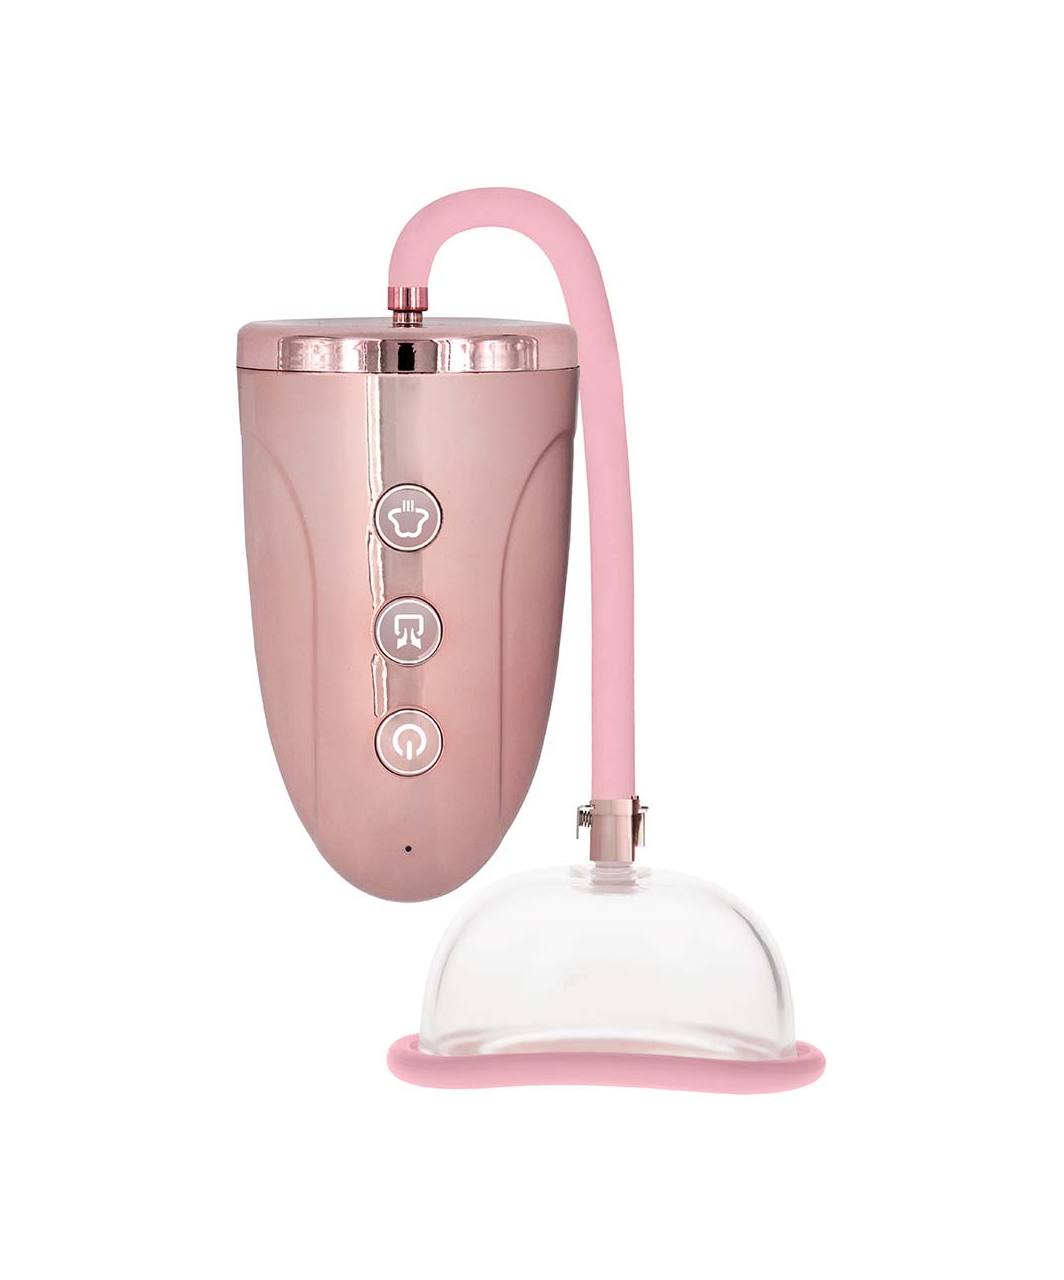 Shots Toys Pumped Rechargeable Pussy Pump